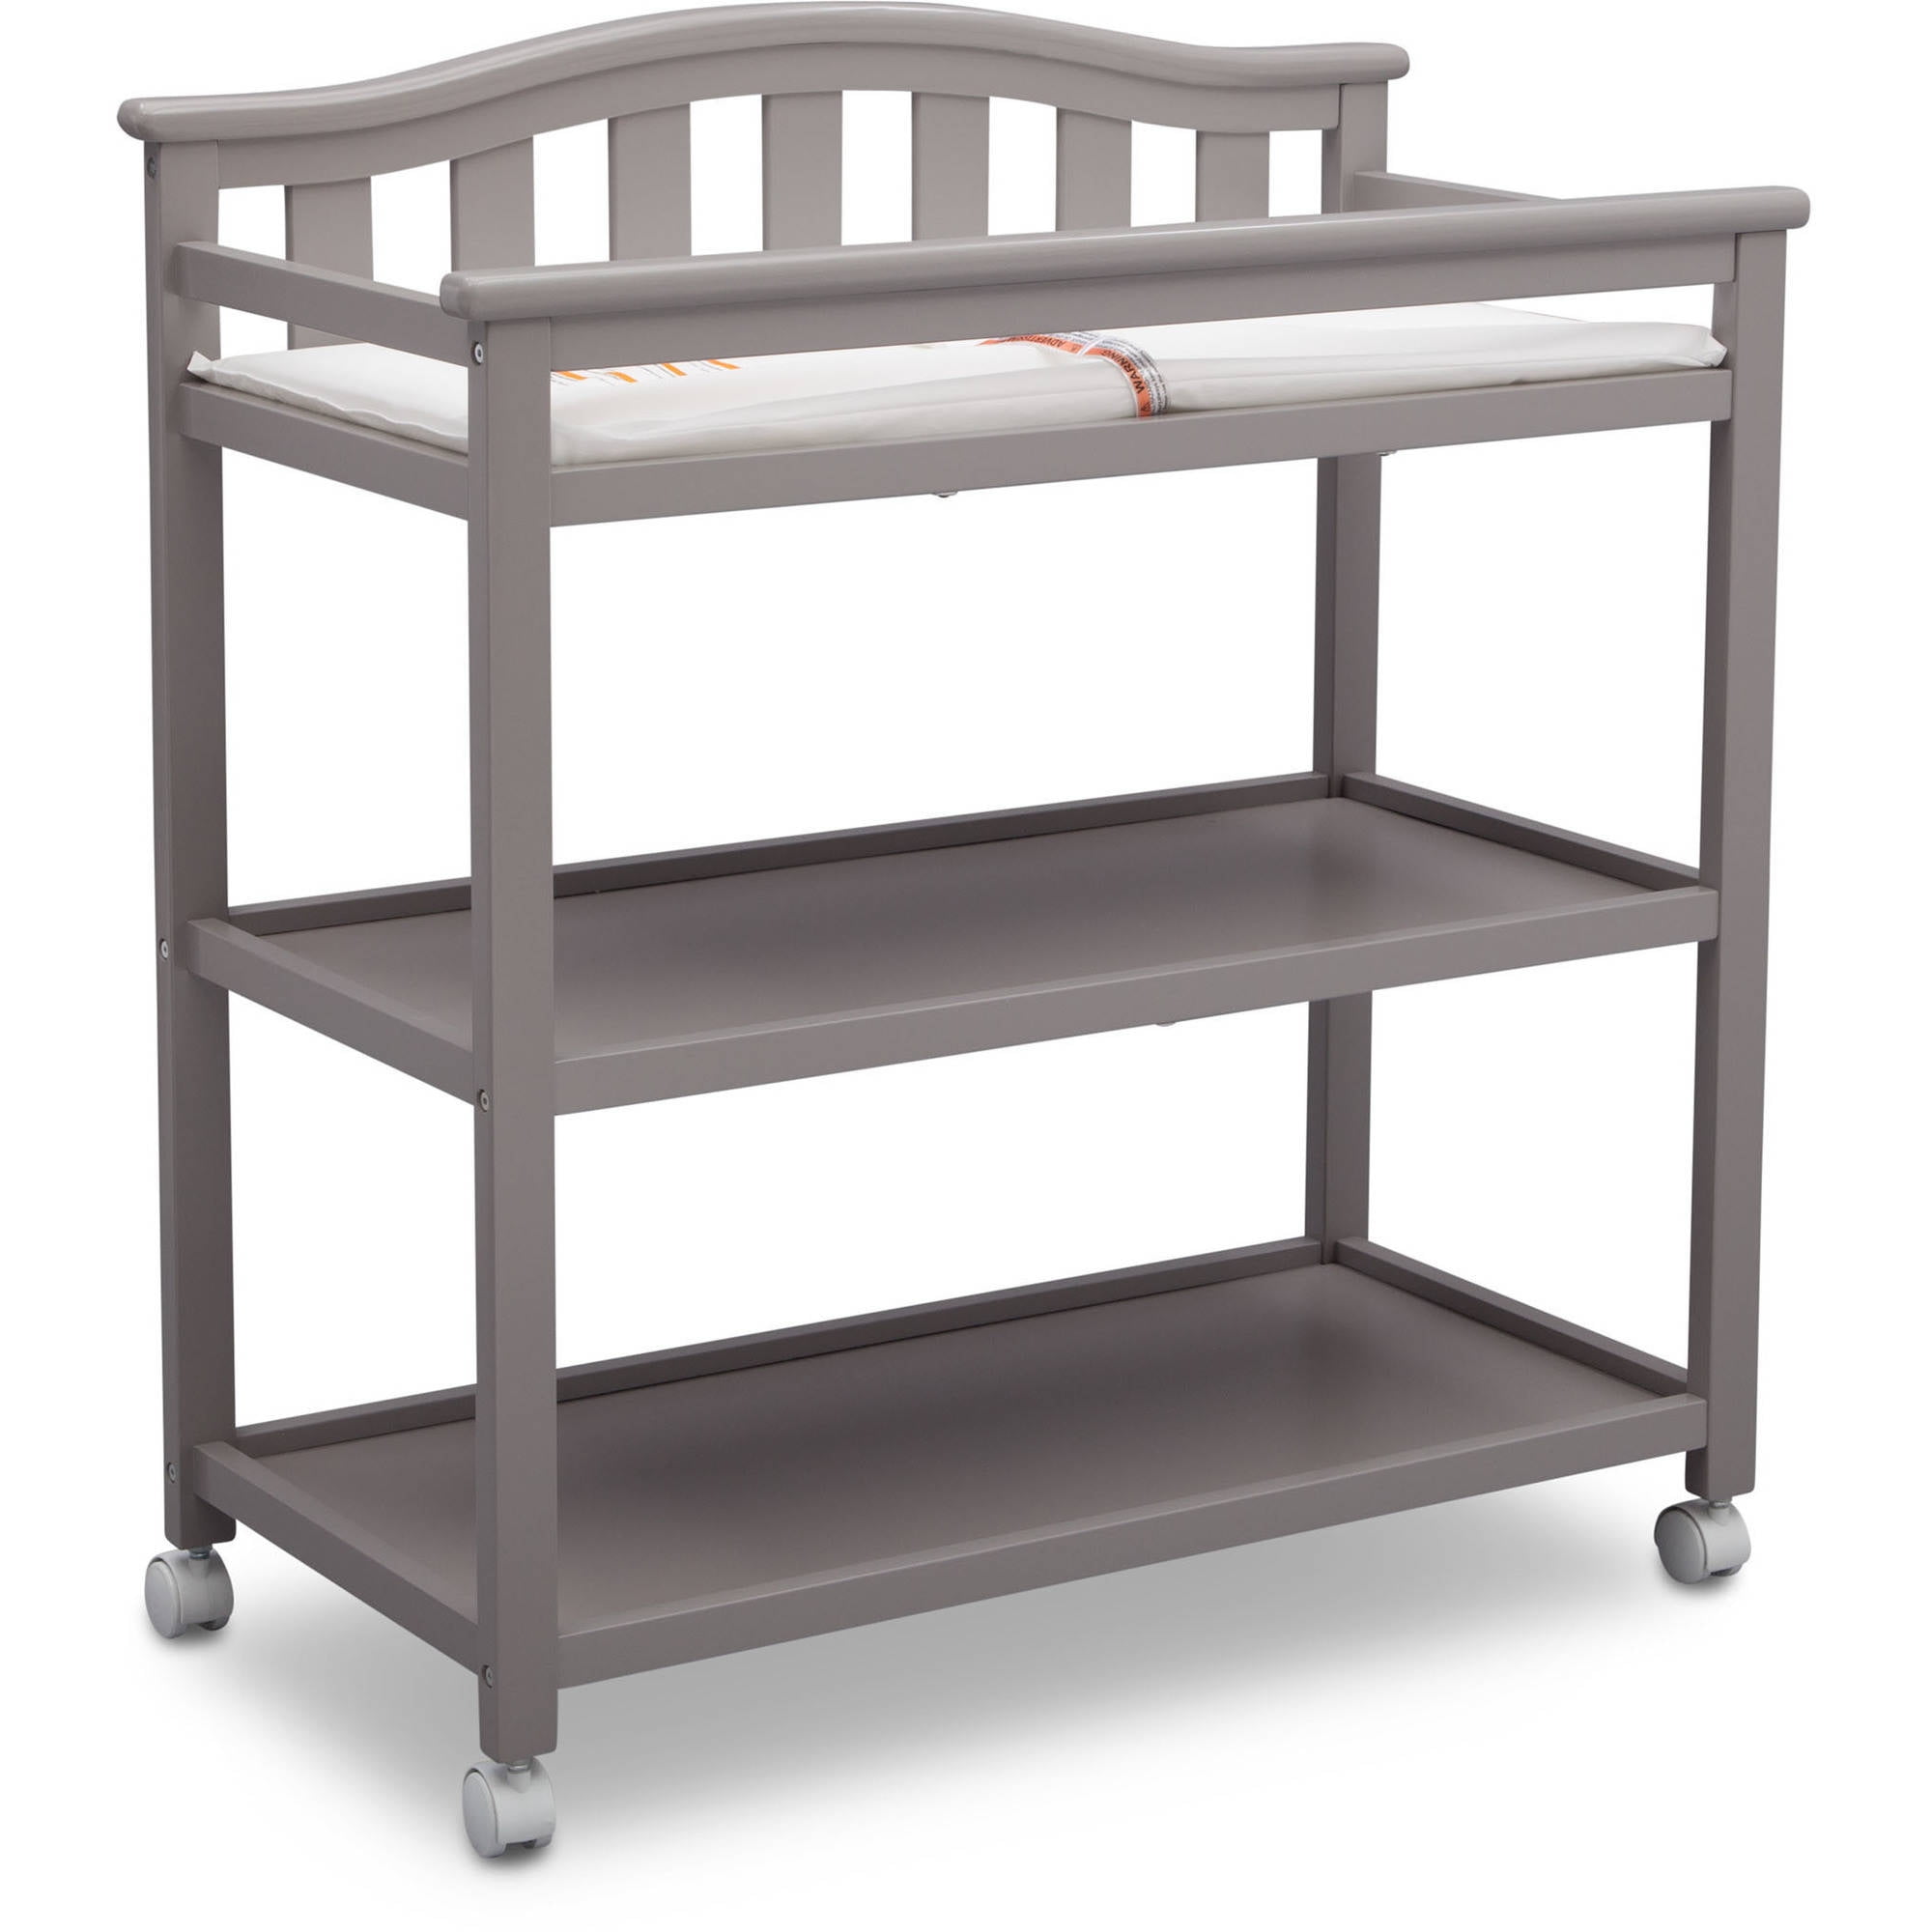 changing table price